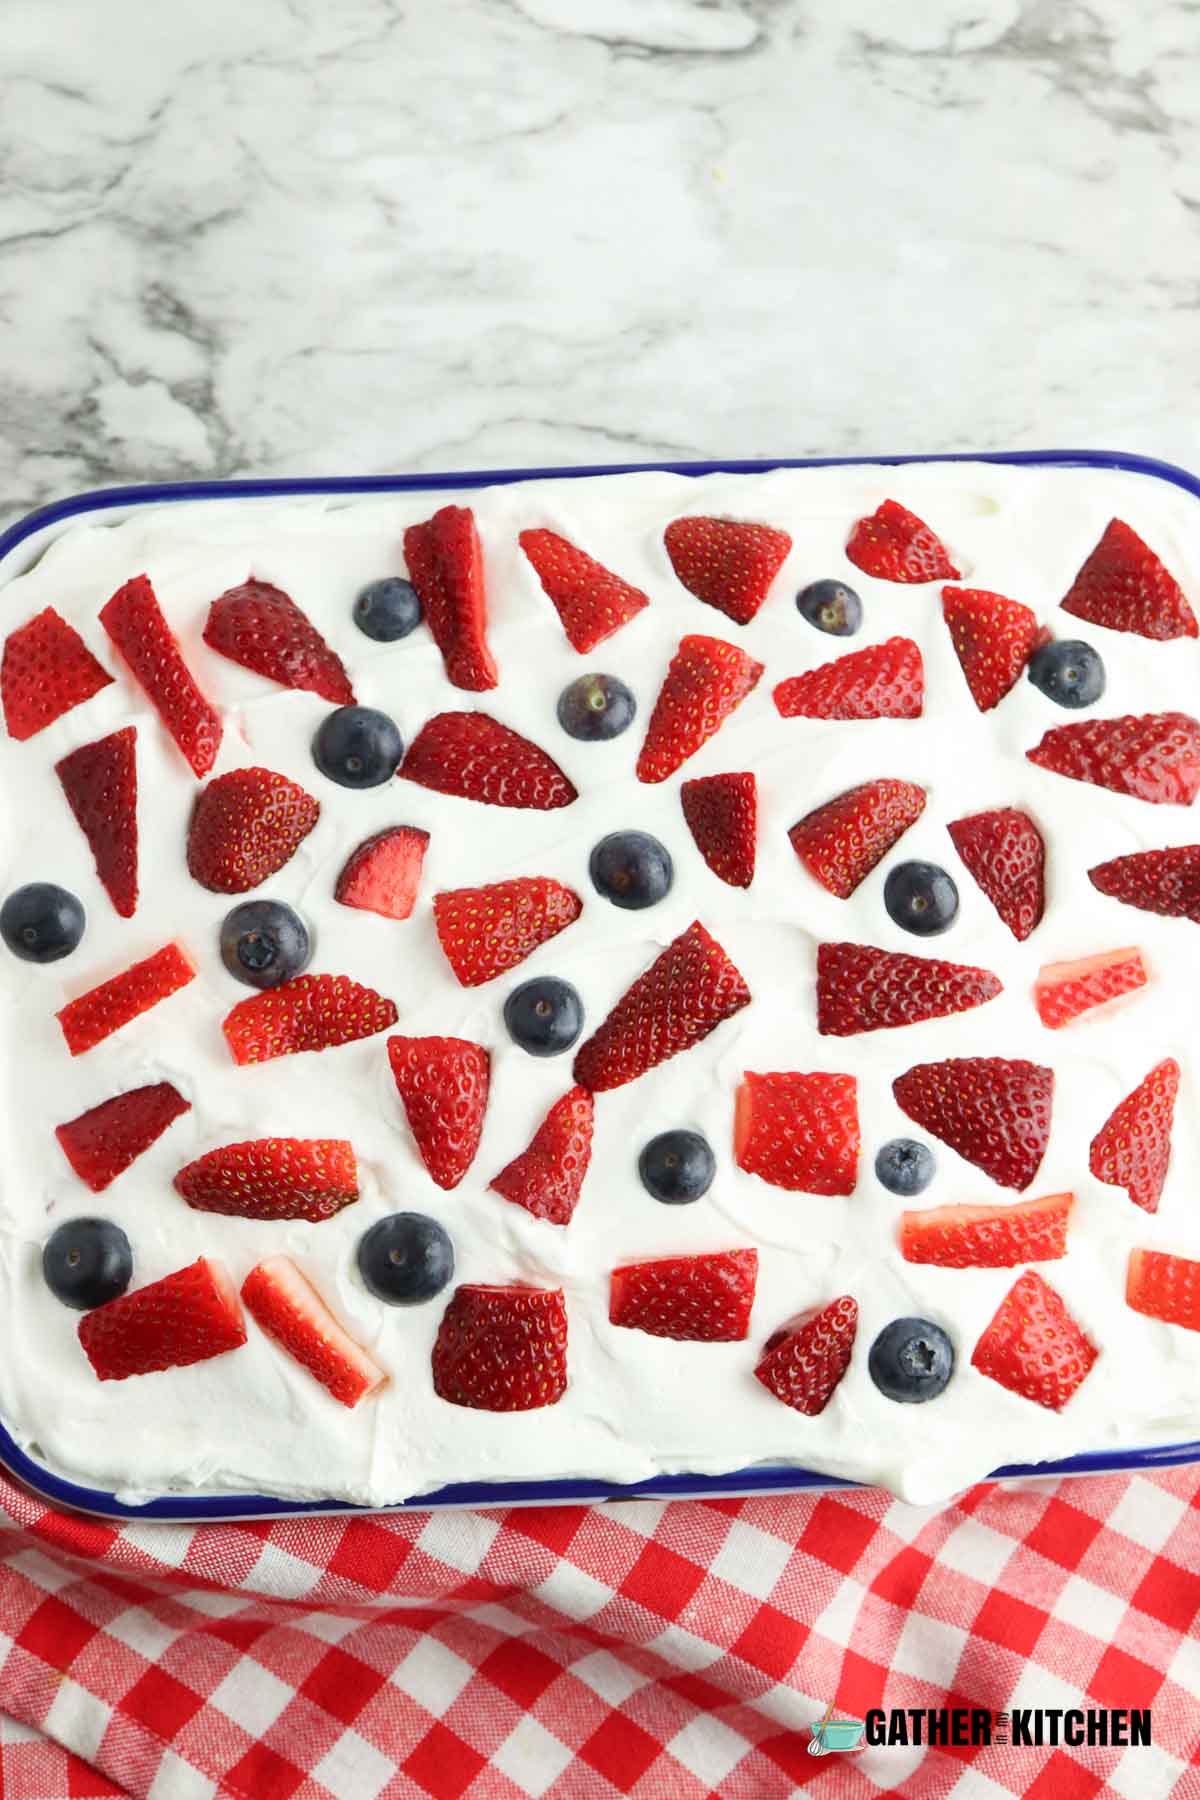 Remaining strawberries and blueberries sprinkled over whipped topping layer.